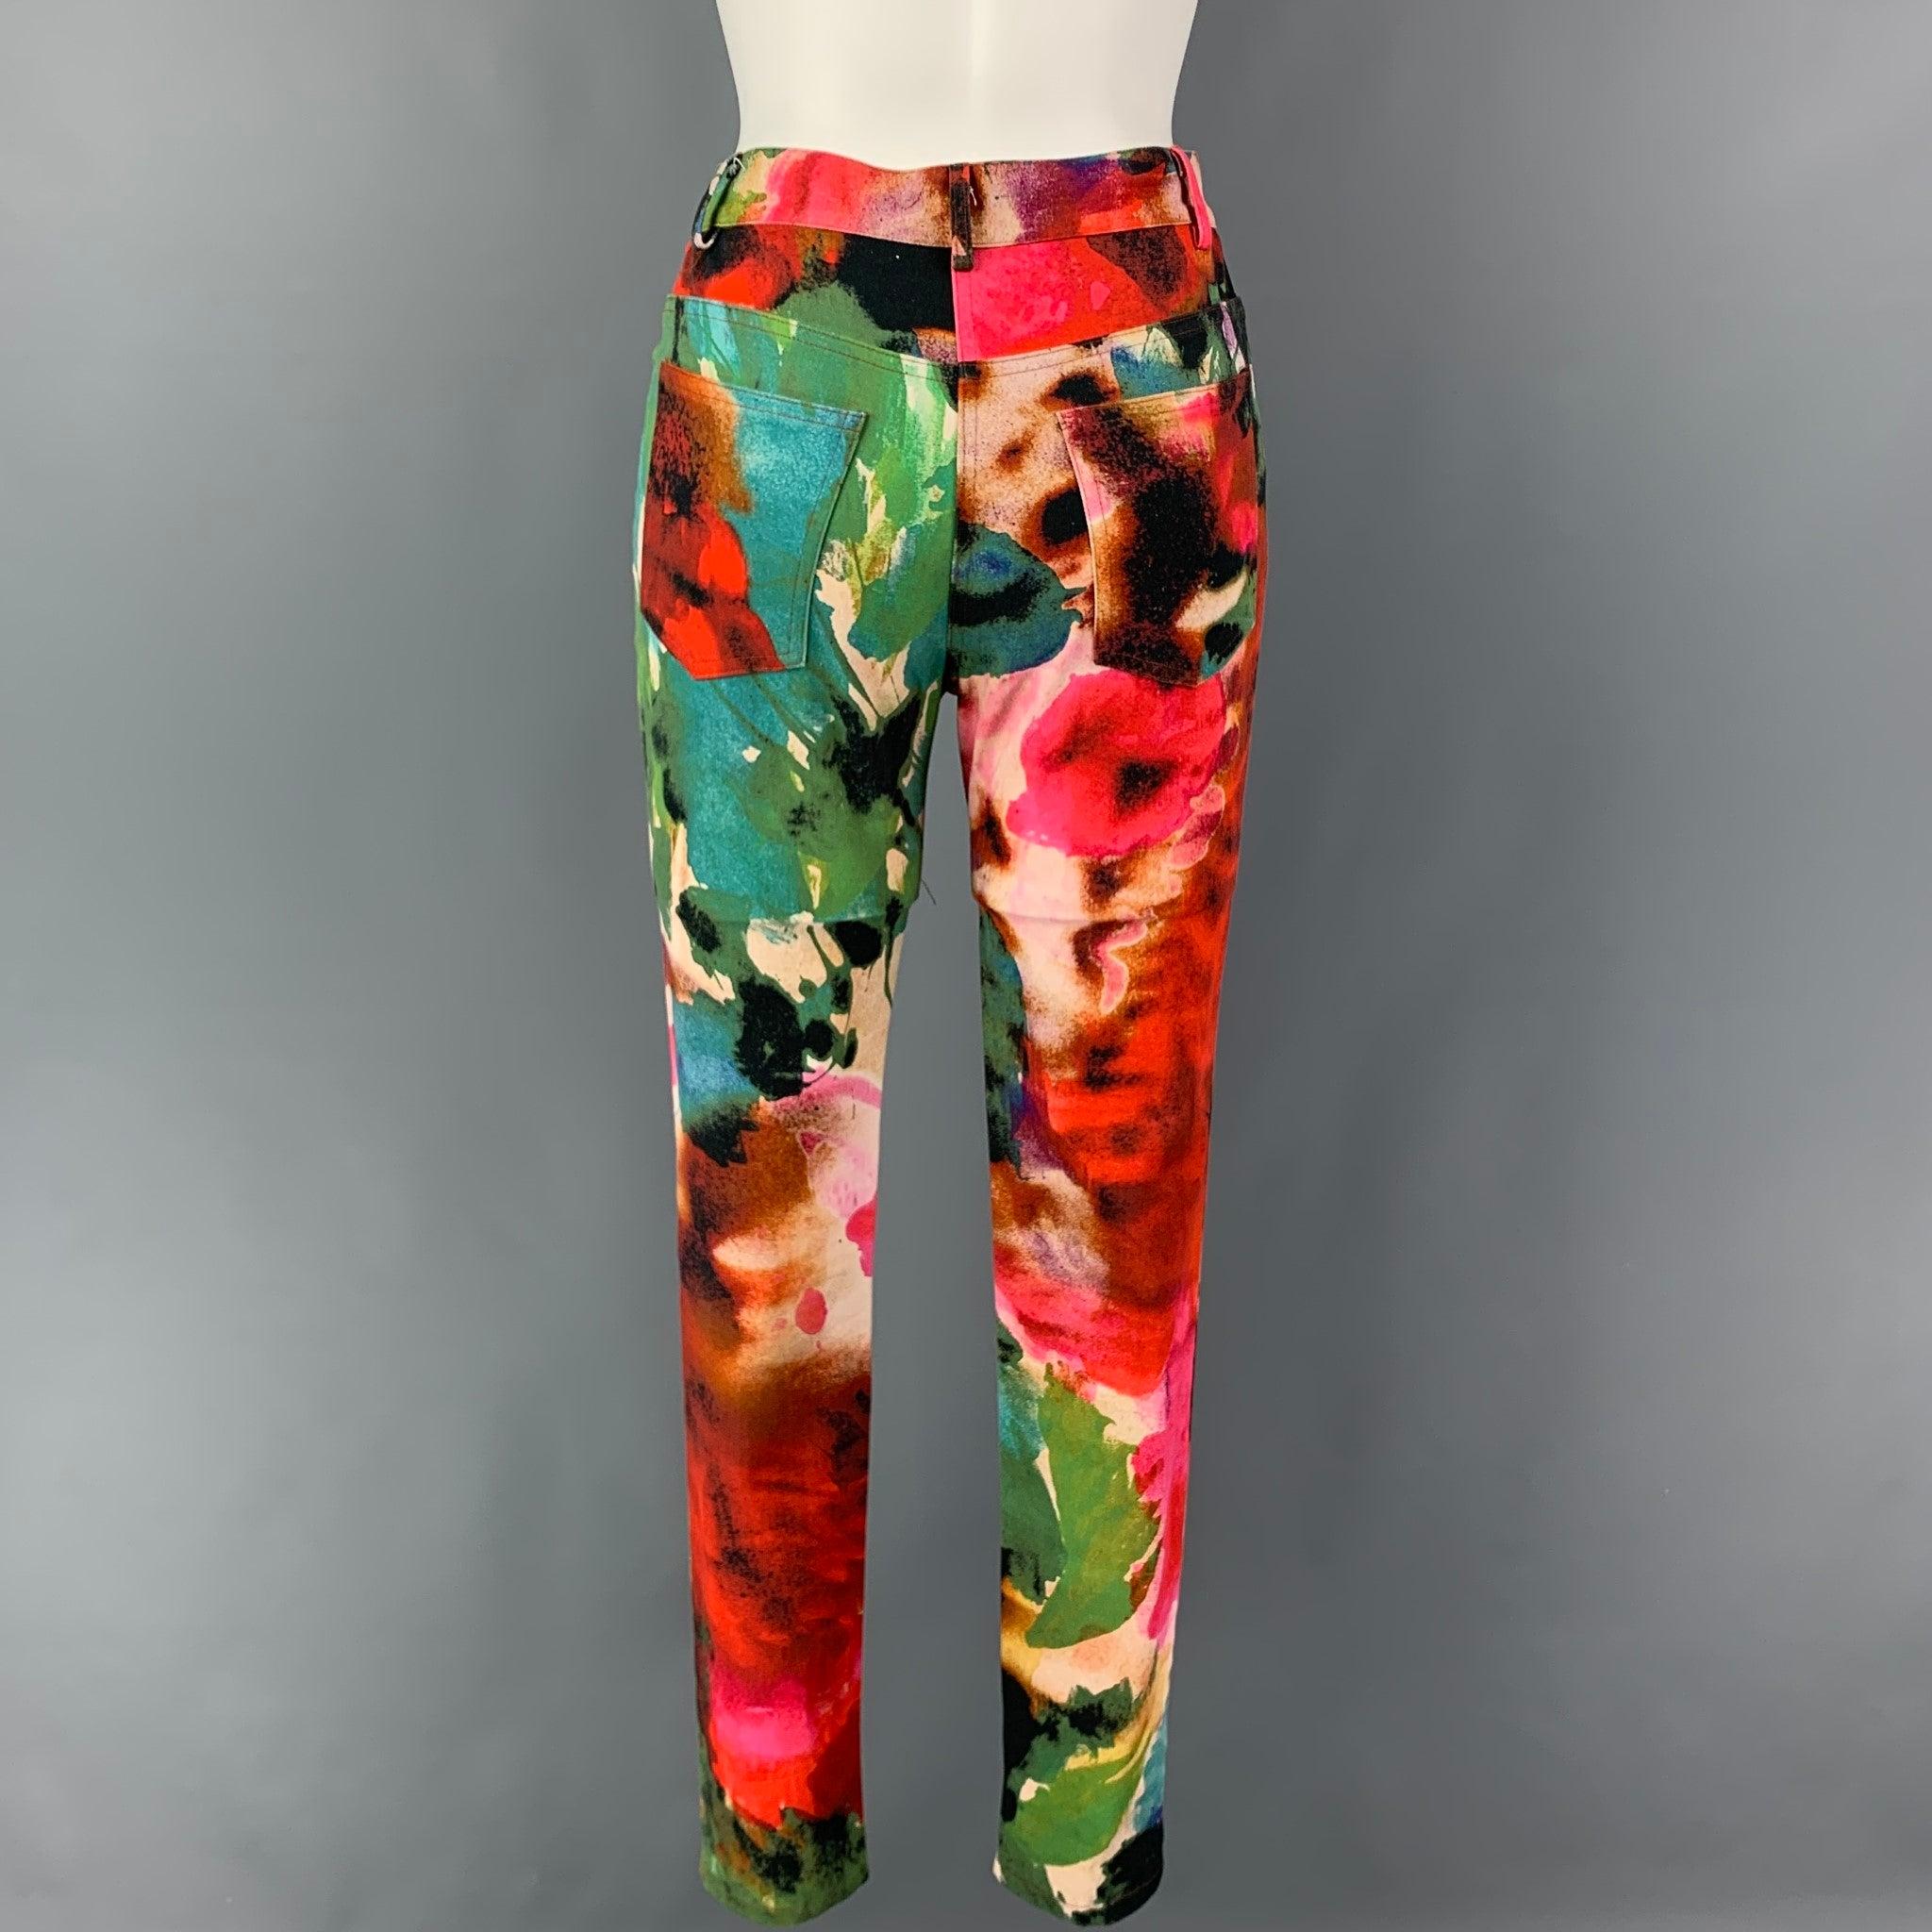 OPENING CEREMONY casual pants comes in a multi-color print cotton featuring a skinny fit, contrast stitching, and a zip fly closure. Made in USA.
Very Good
Pre-Owned Condition. 

Marked:   XS 

Measurements: 
  Waist: 26 inches  Rise: 10 inches 